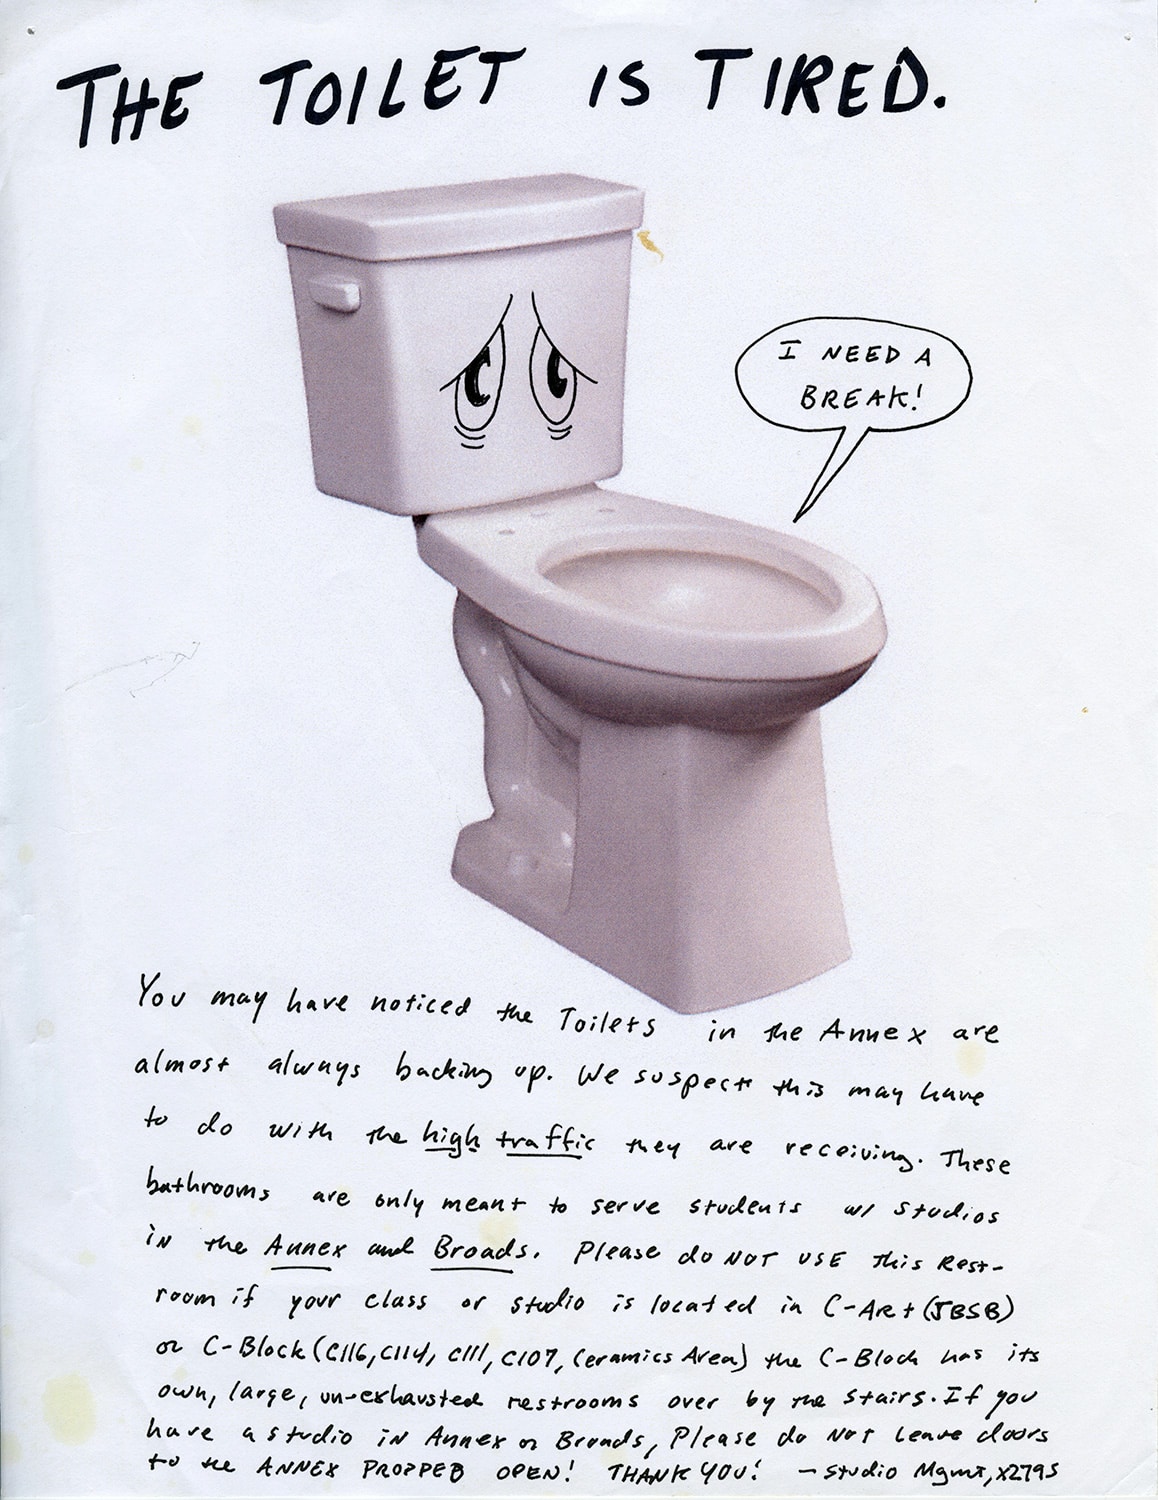 Image of toilet with sad eyes and speech bubble reading 'I need a break!' Top text reads: 'The toilet is tired.'